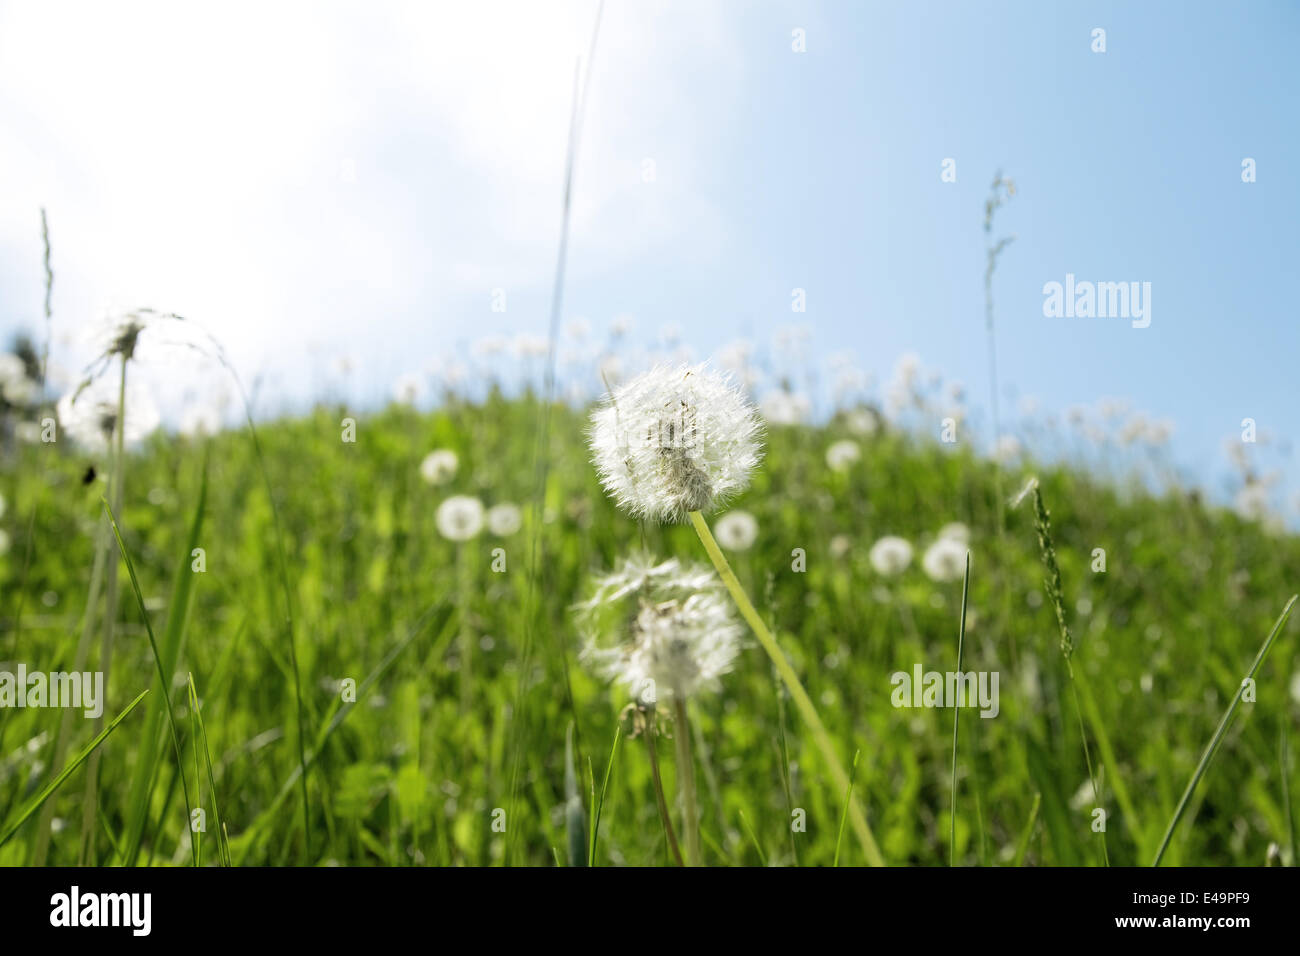 Green grass and dandelions Stock Photo